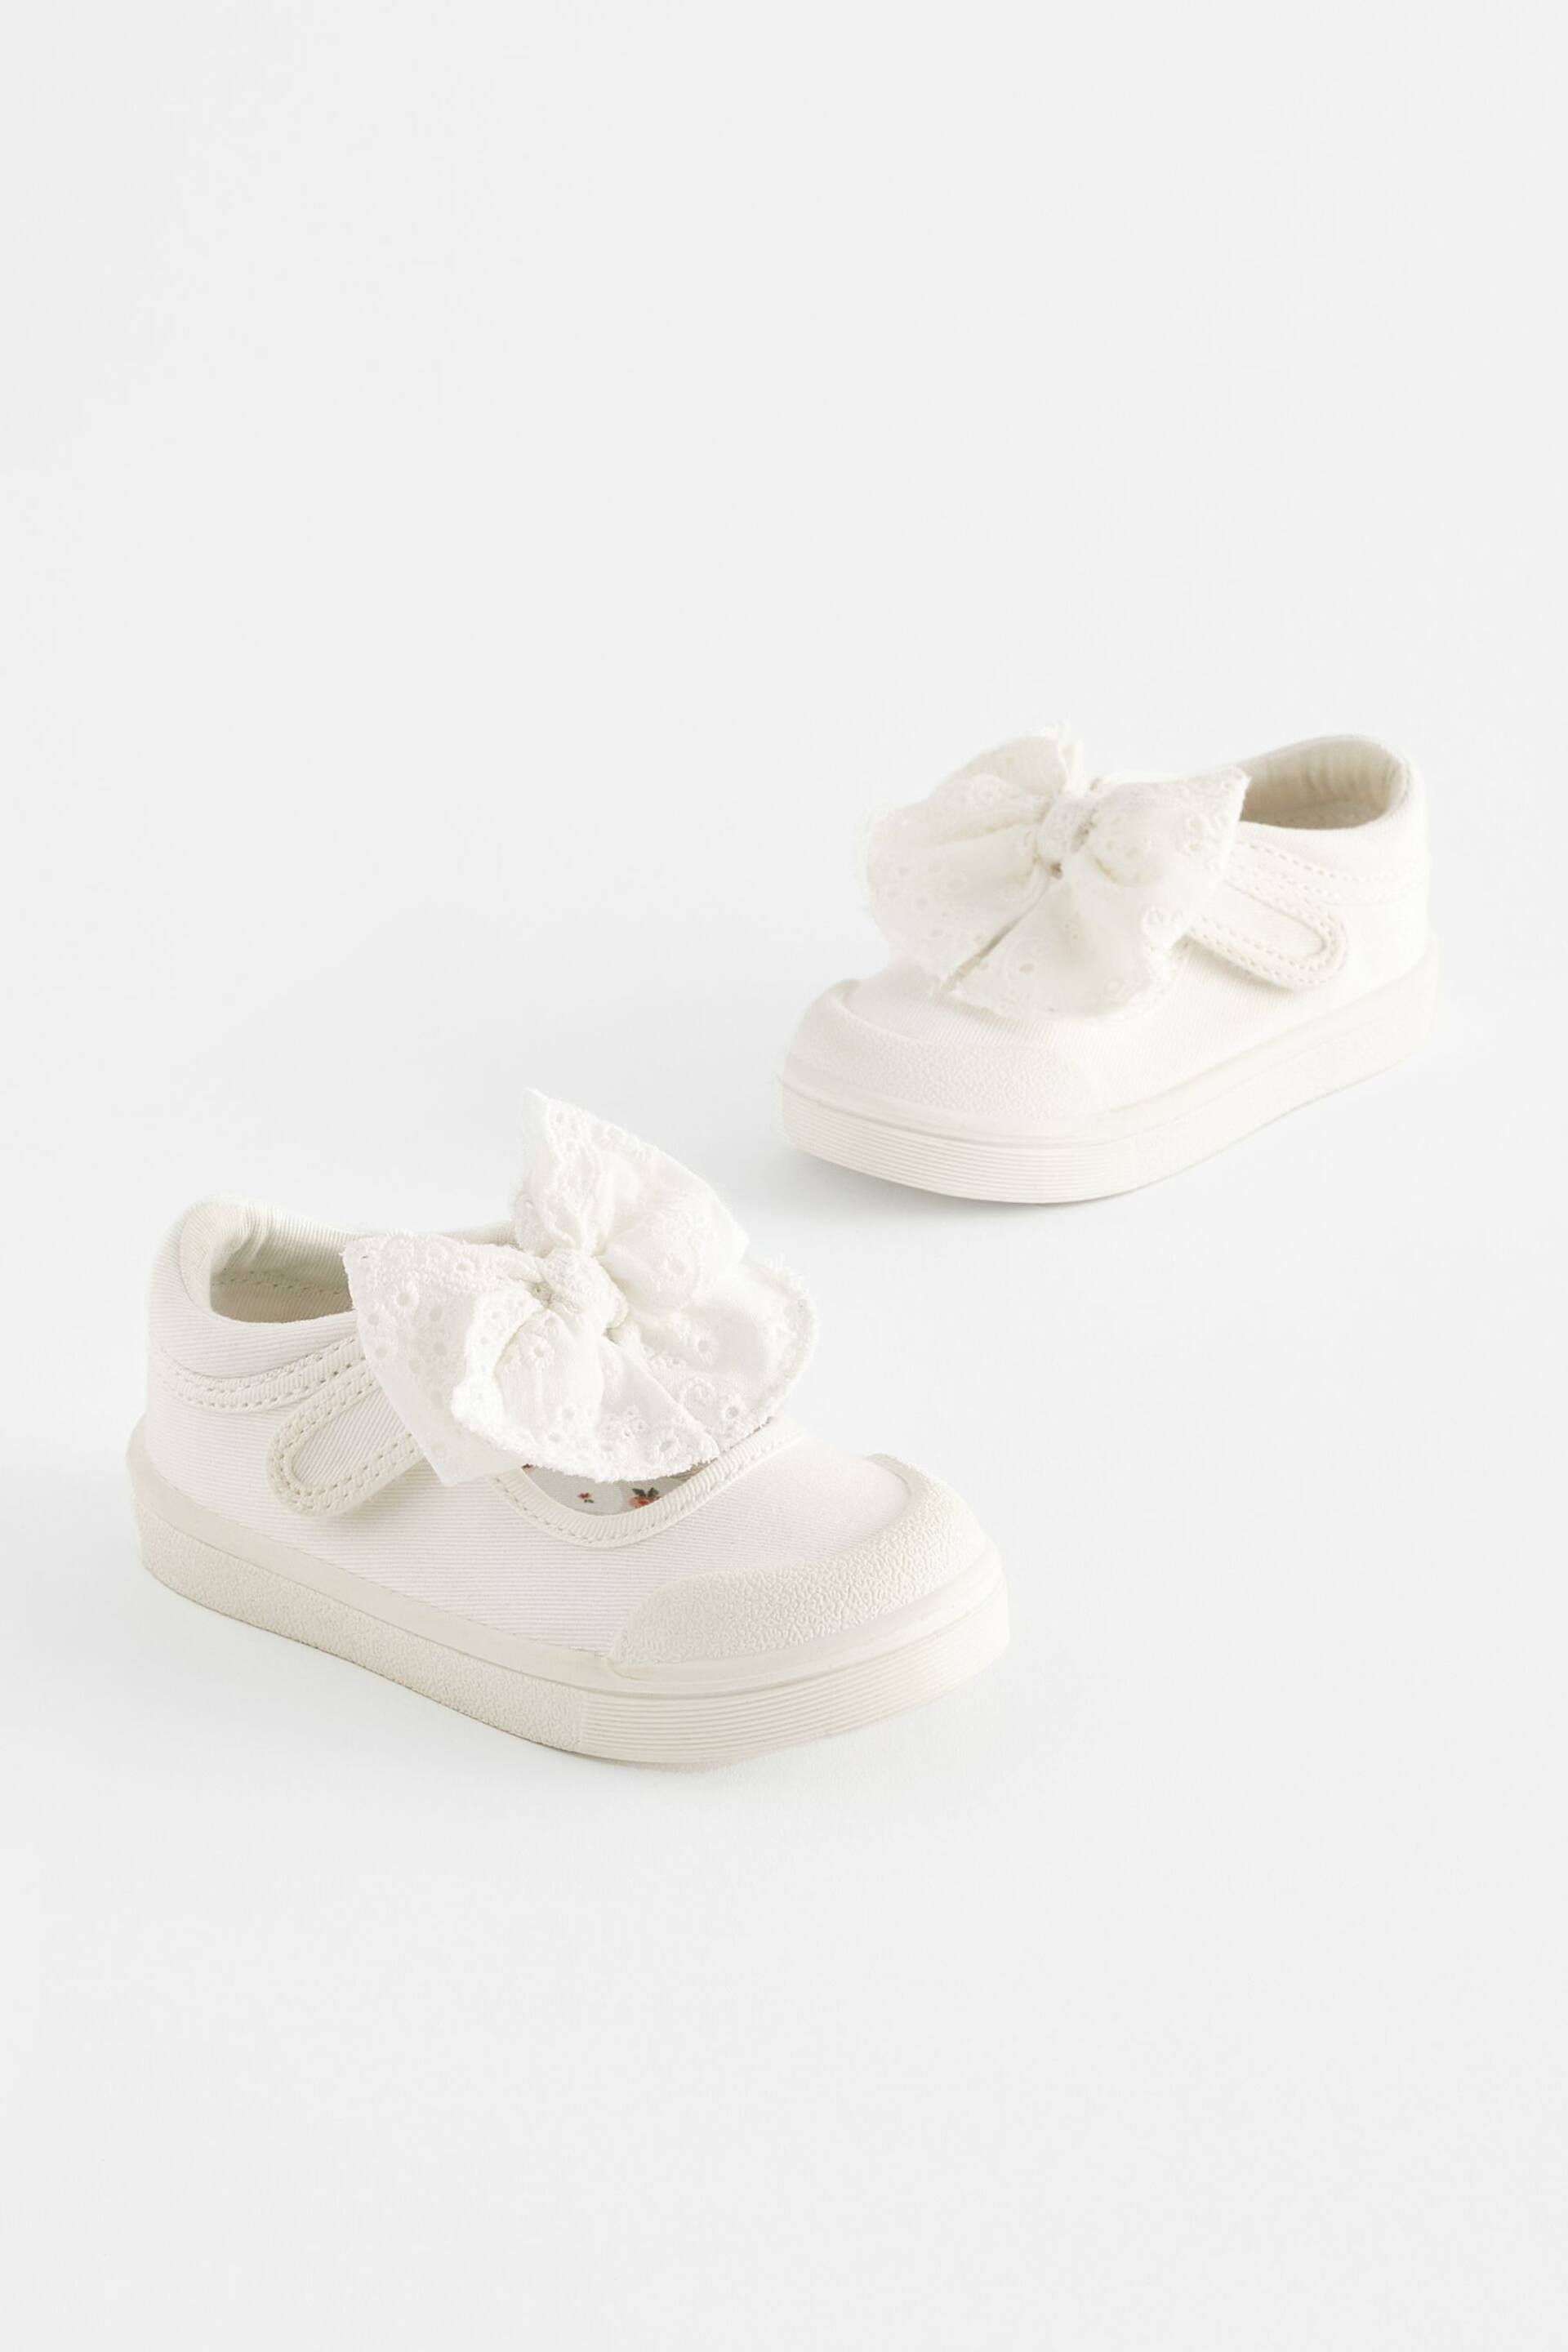 White Standard Fit (F) Machine Washable Mary Jane Shoes - Image 1 of 6